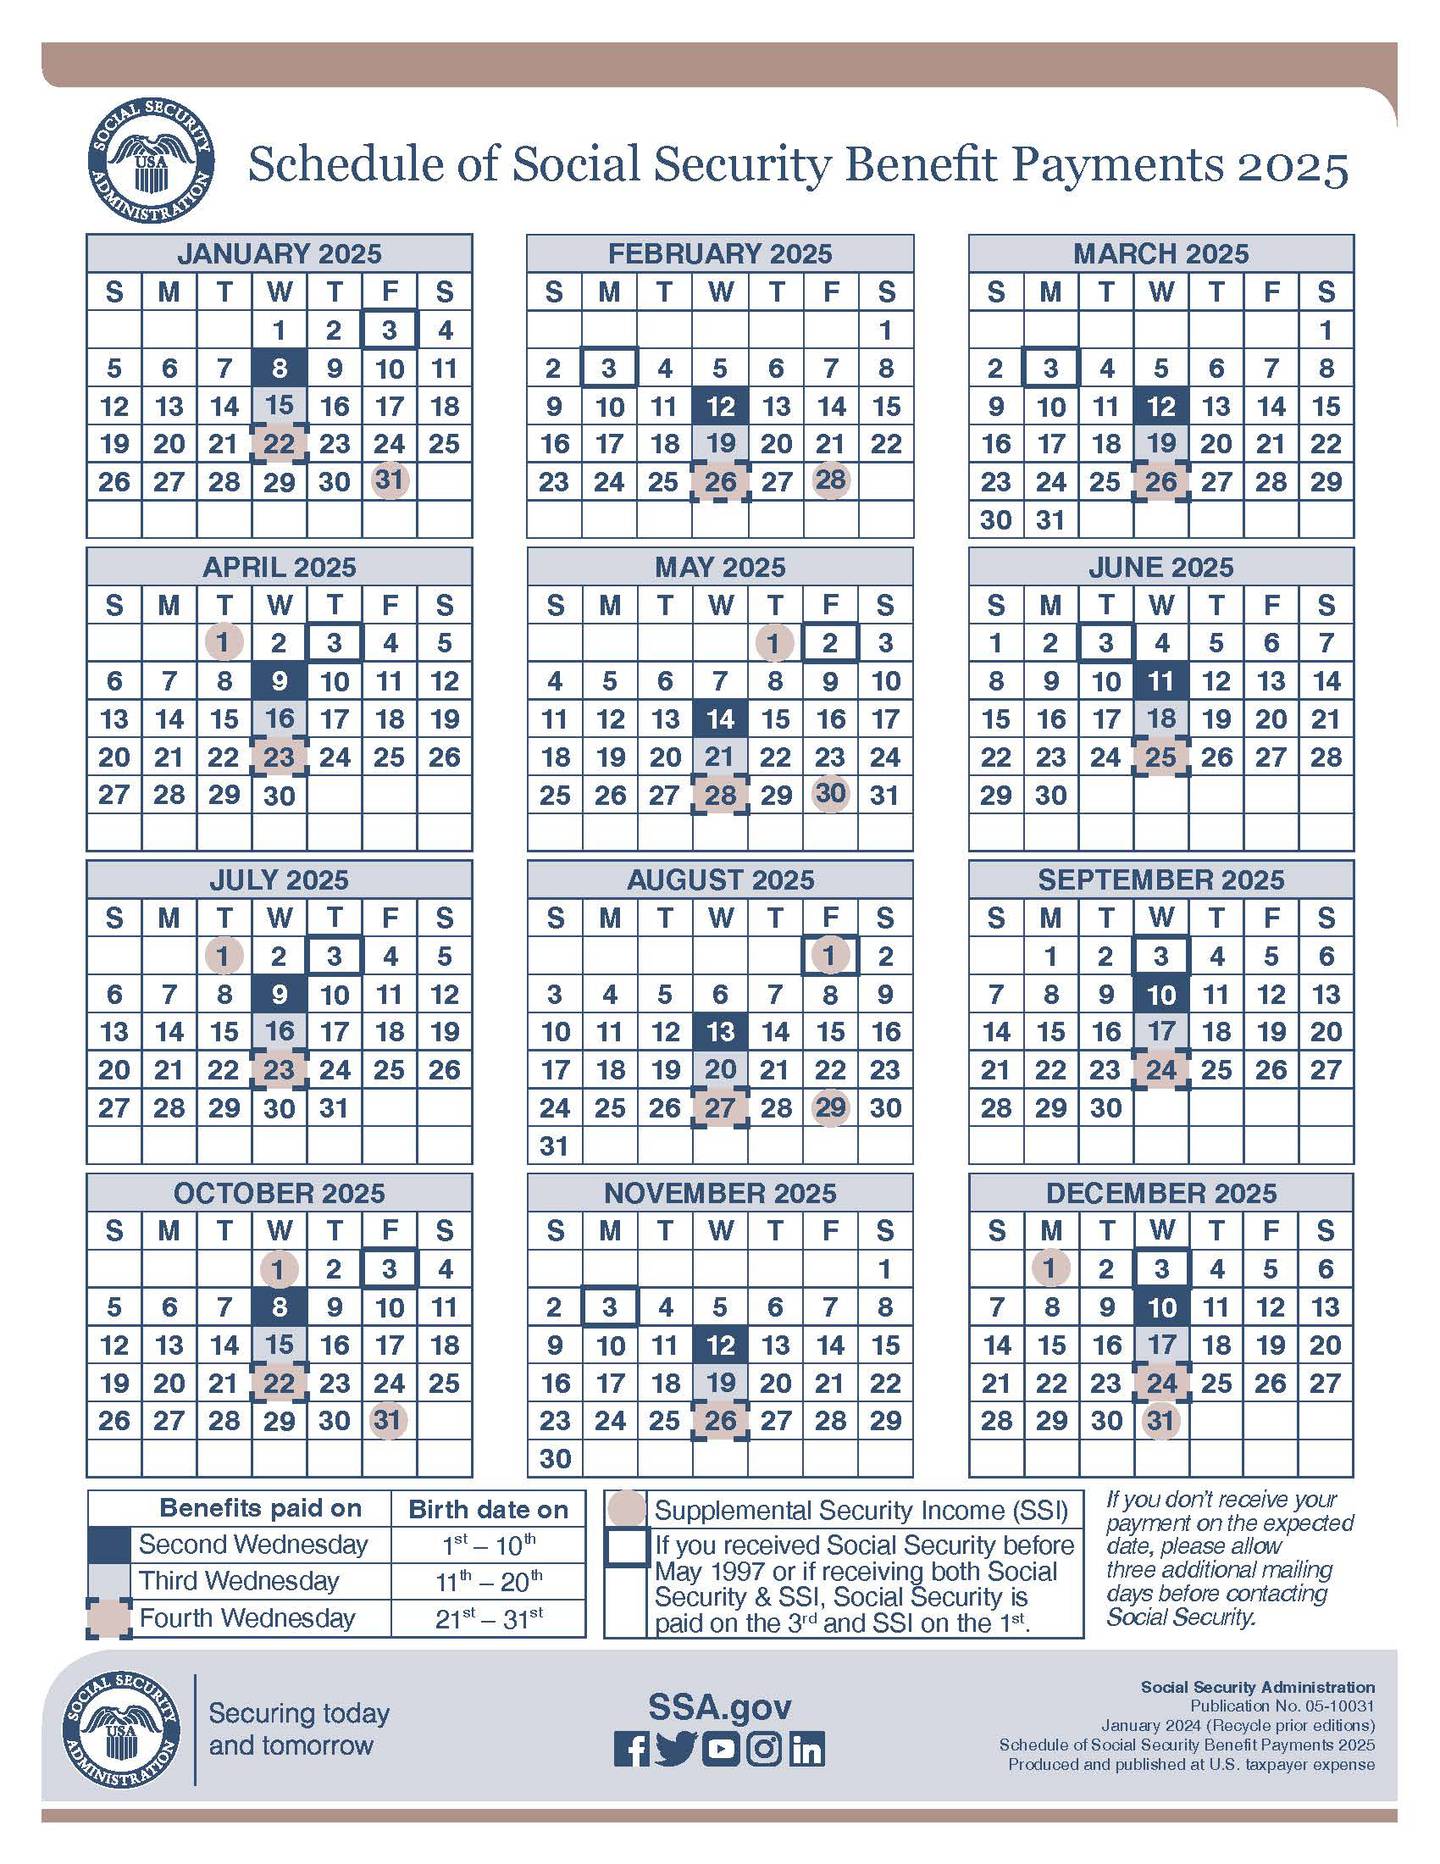 Calendar of Social Security Payments for 2025